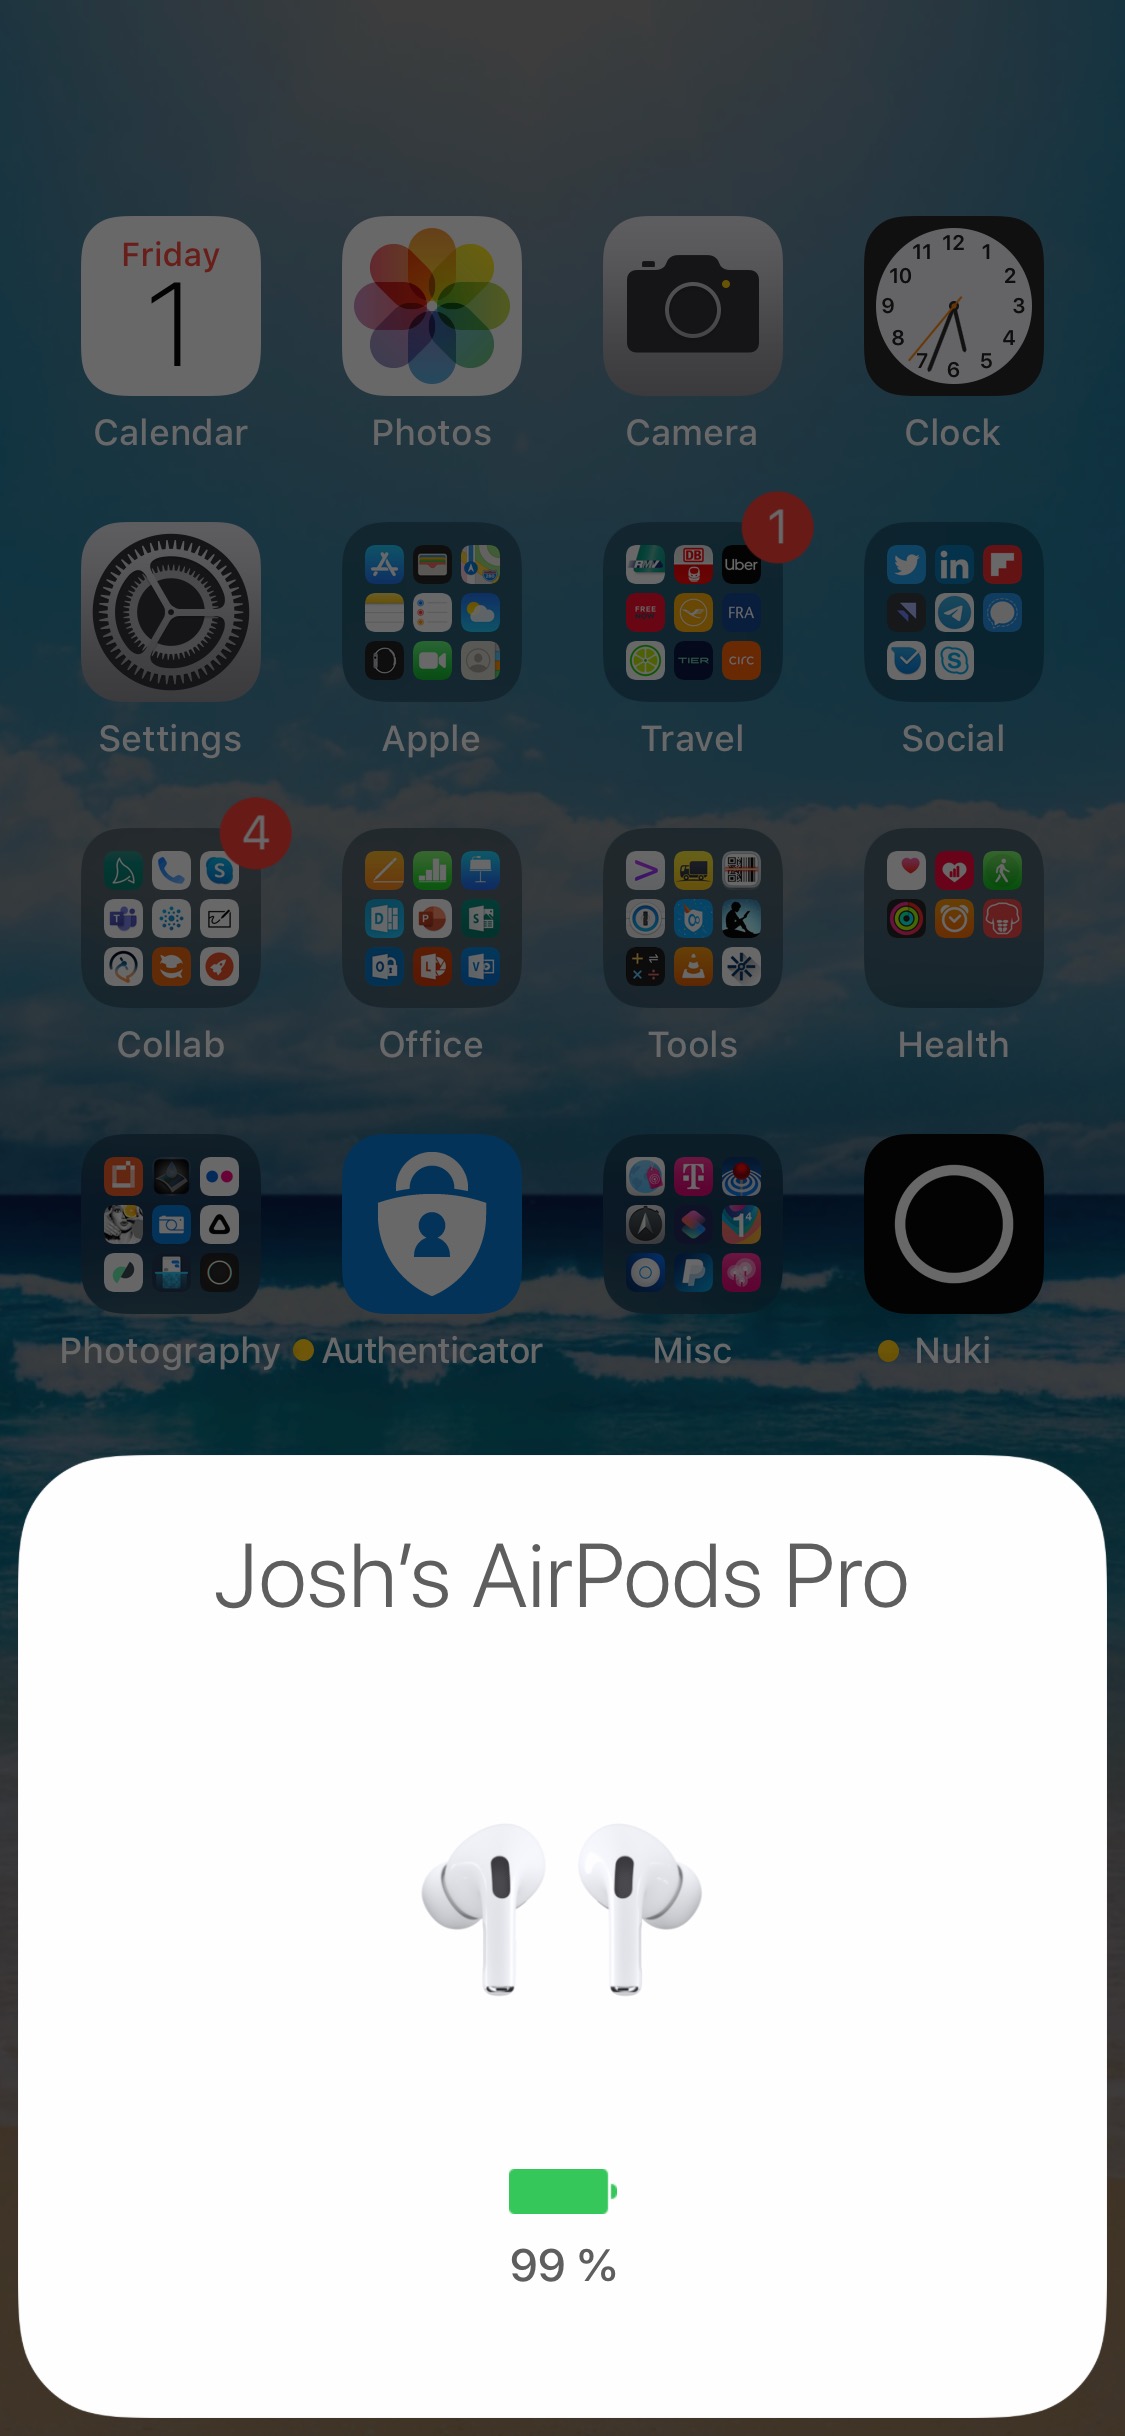 Connected the AirPods Pro